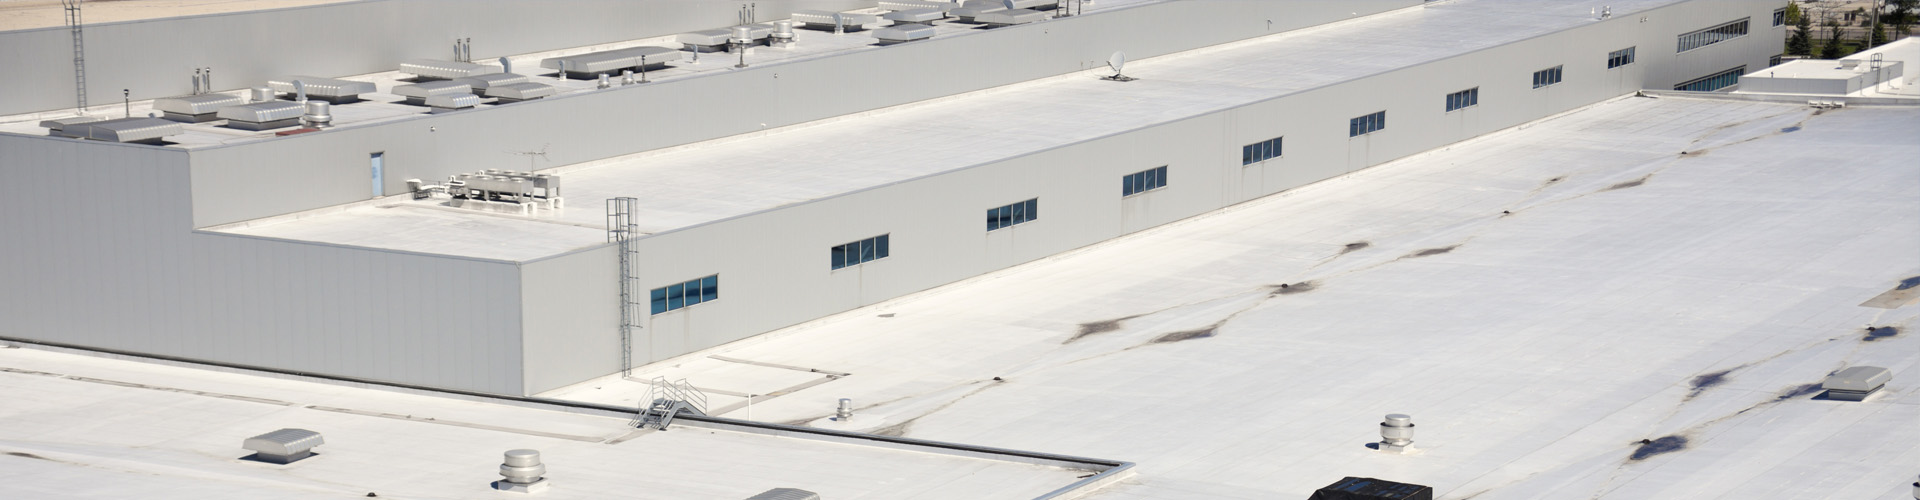 Axial Flow Roof Mounted Fans 